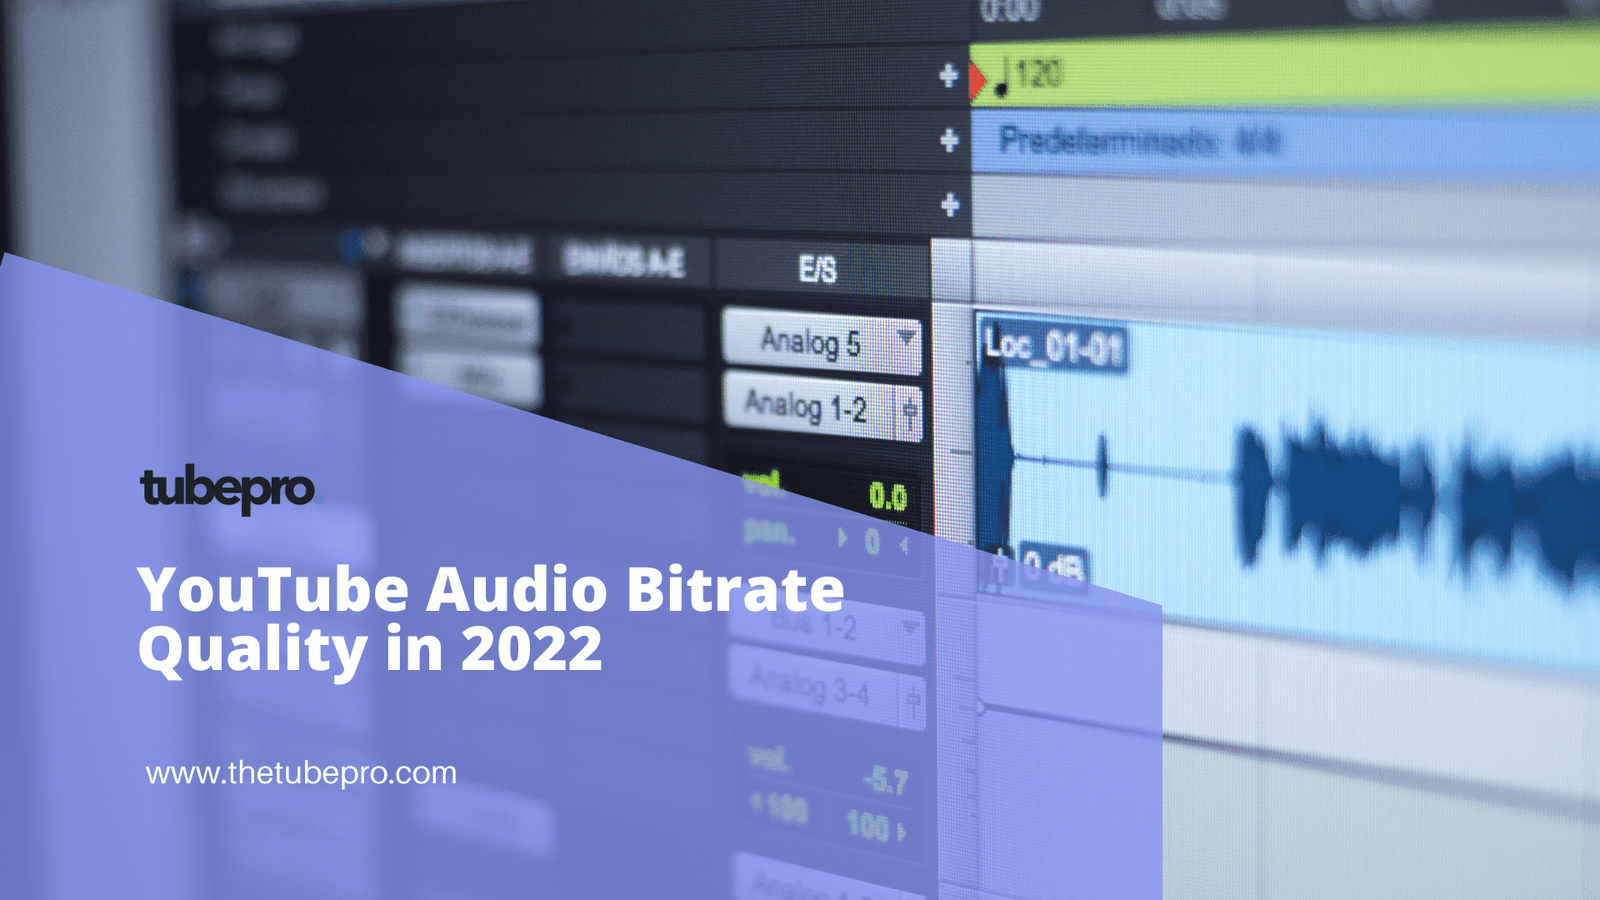 YouTube Audio Bitrate Quality in 2022